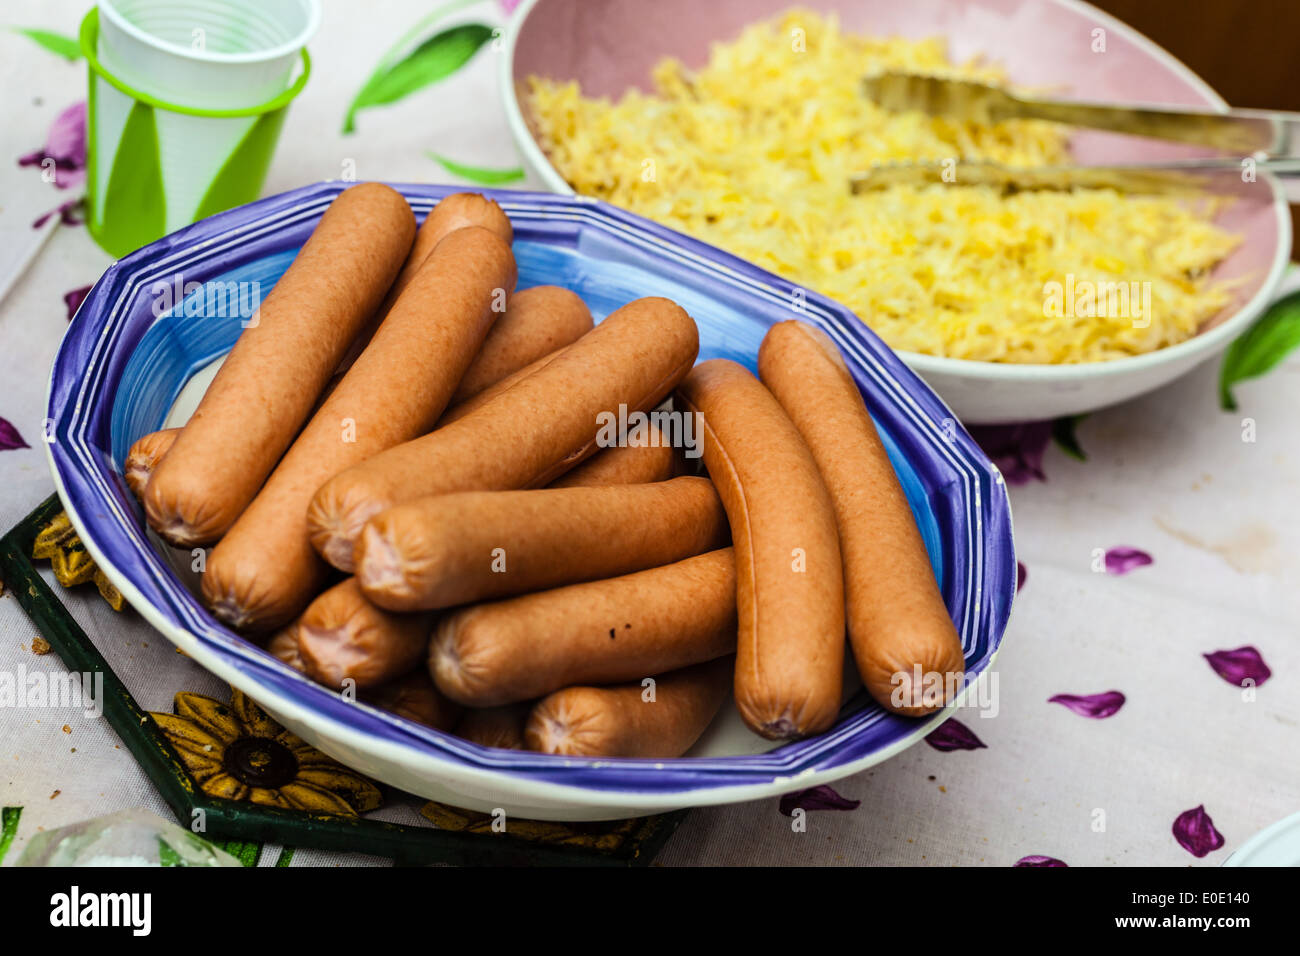 a bowl filled up with a lot of steaming wiener sausages Stock Photo